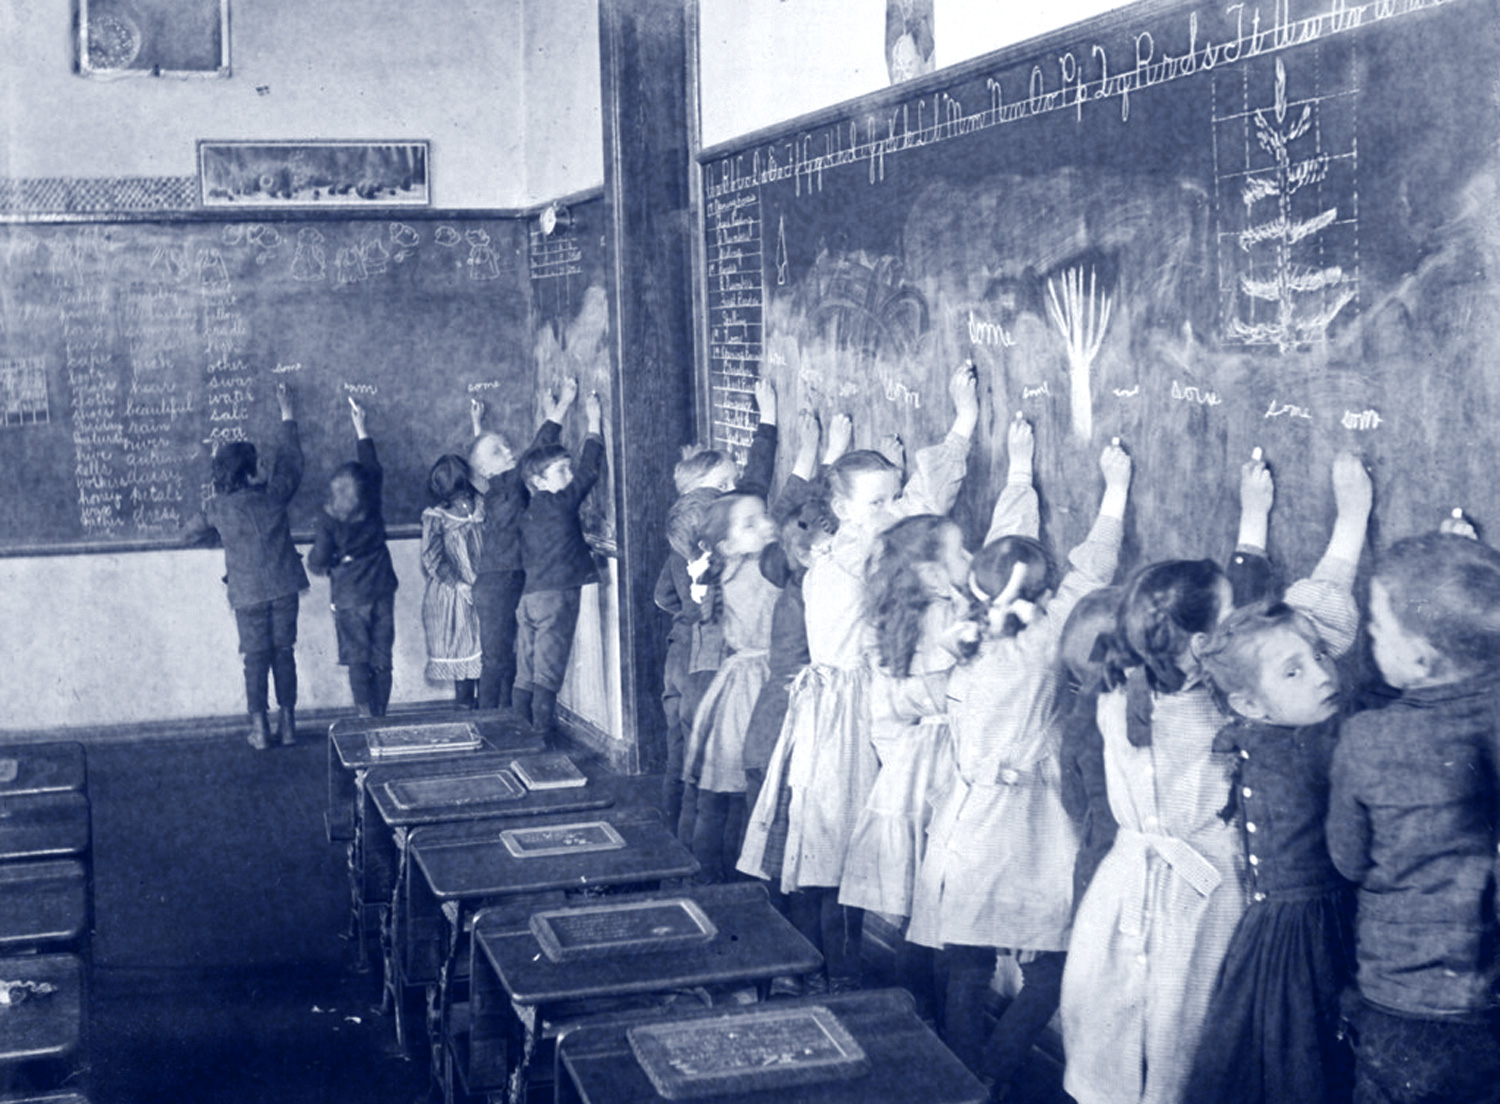 This image shows a group of students writing on a chalkboard in a classroom. 
